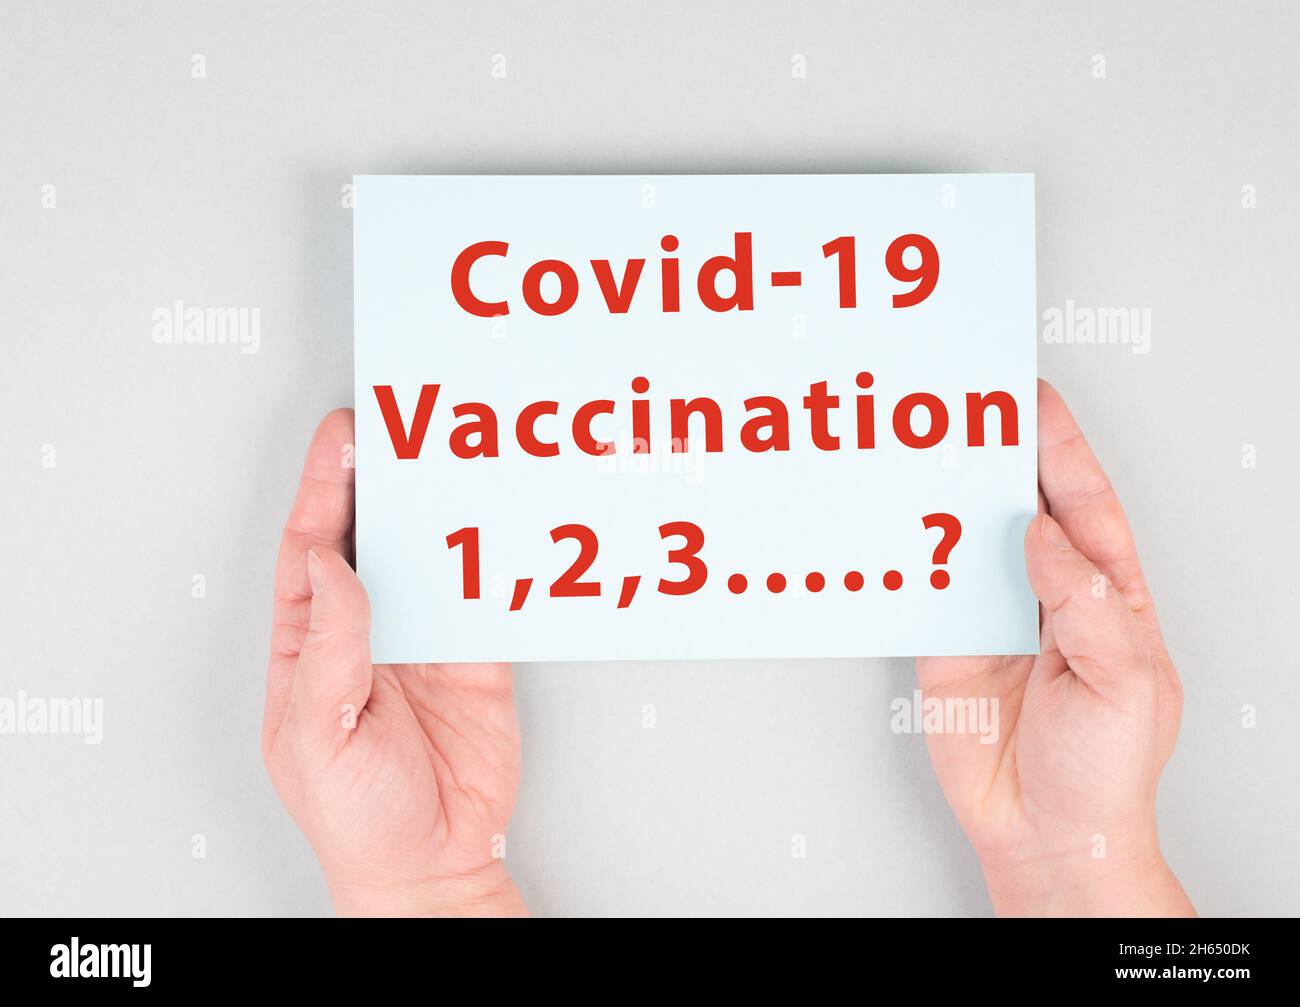 Covid-19 Vaccination, how many, vaccine breakthrough, holding message in the hand, health issue Stock Photo